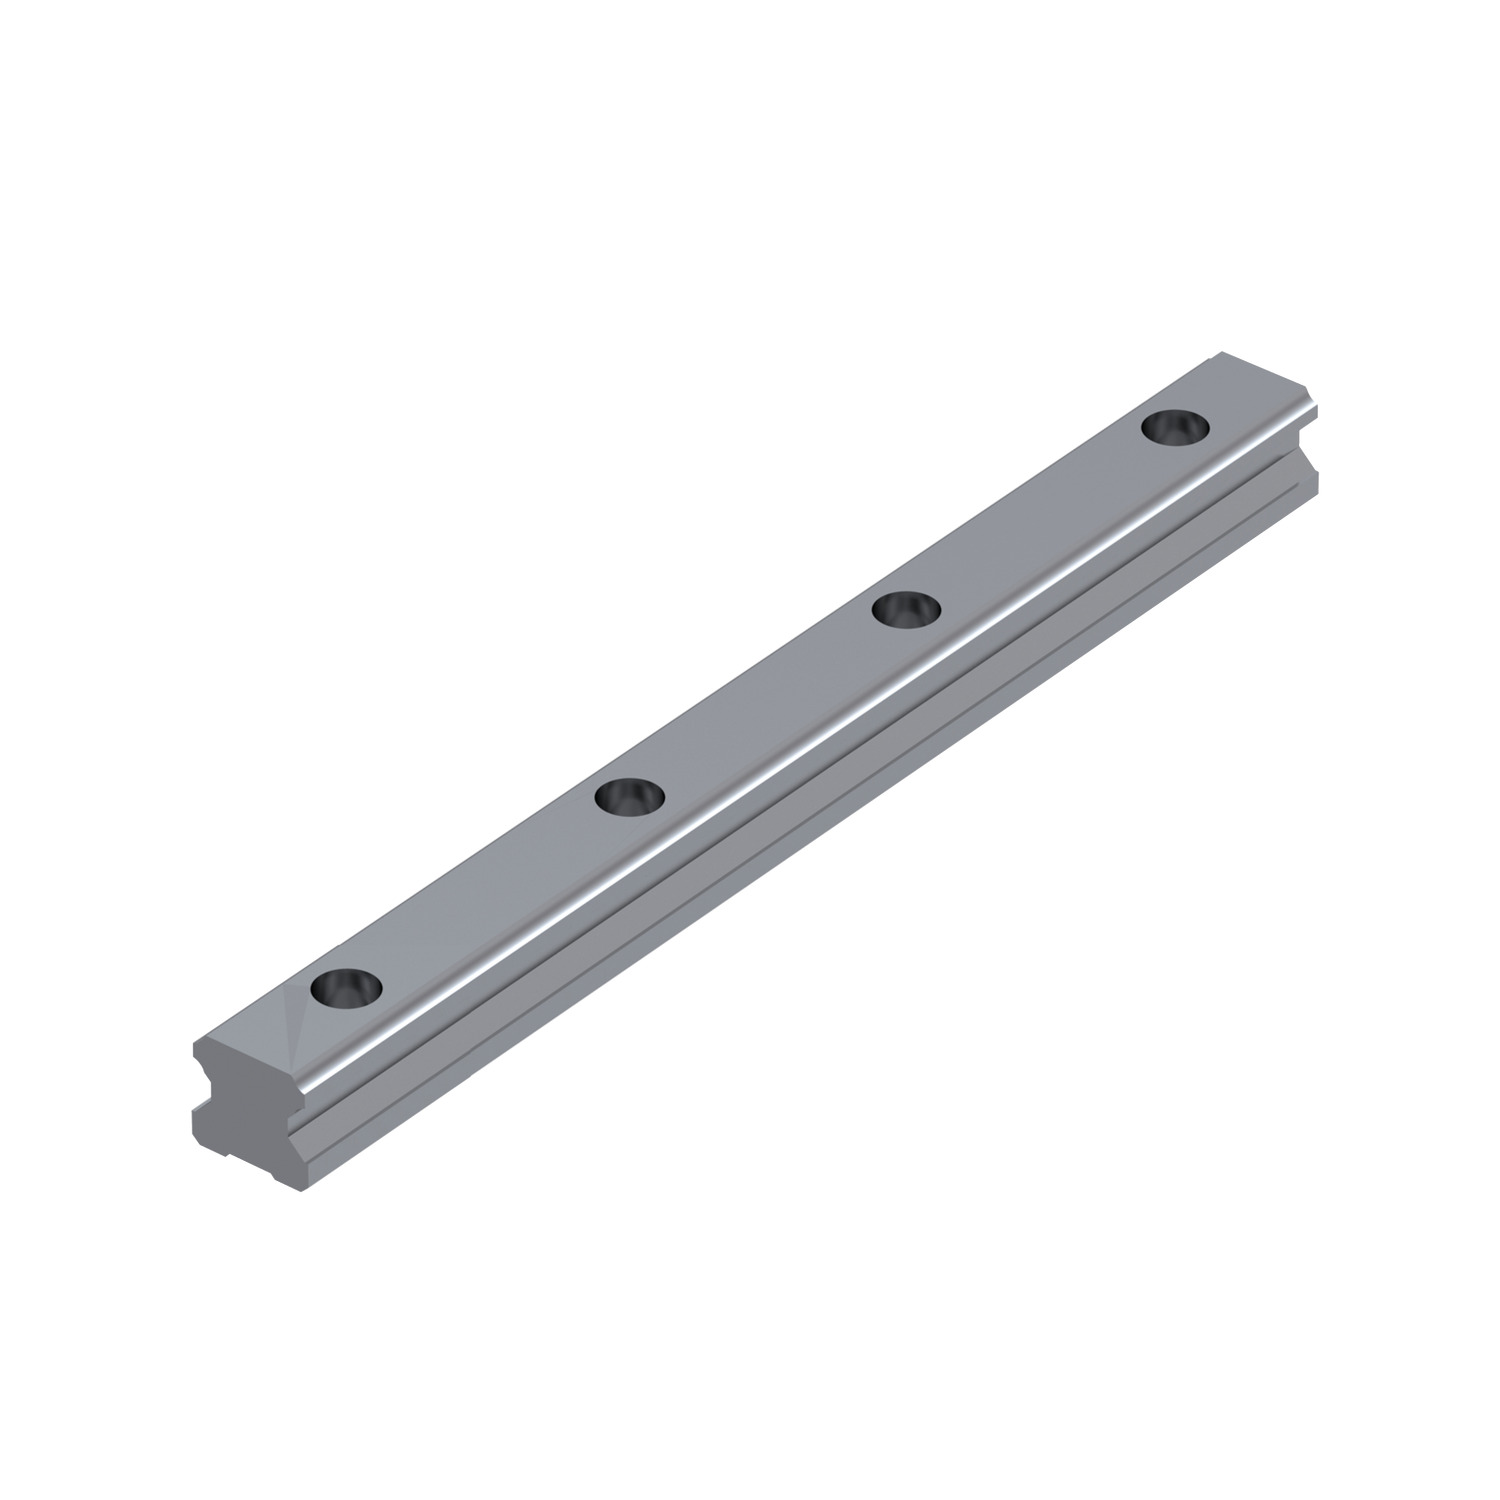 L1016.20-0520 Linear guide rail 20mm 520 Hardened and ground steel. EC:20163167 WG:05063055289306